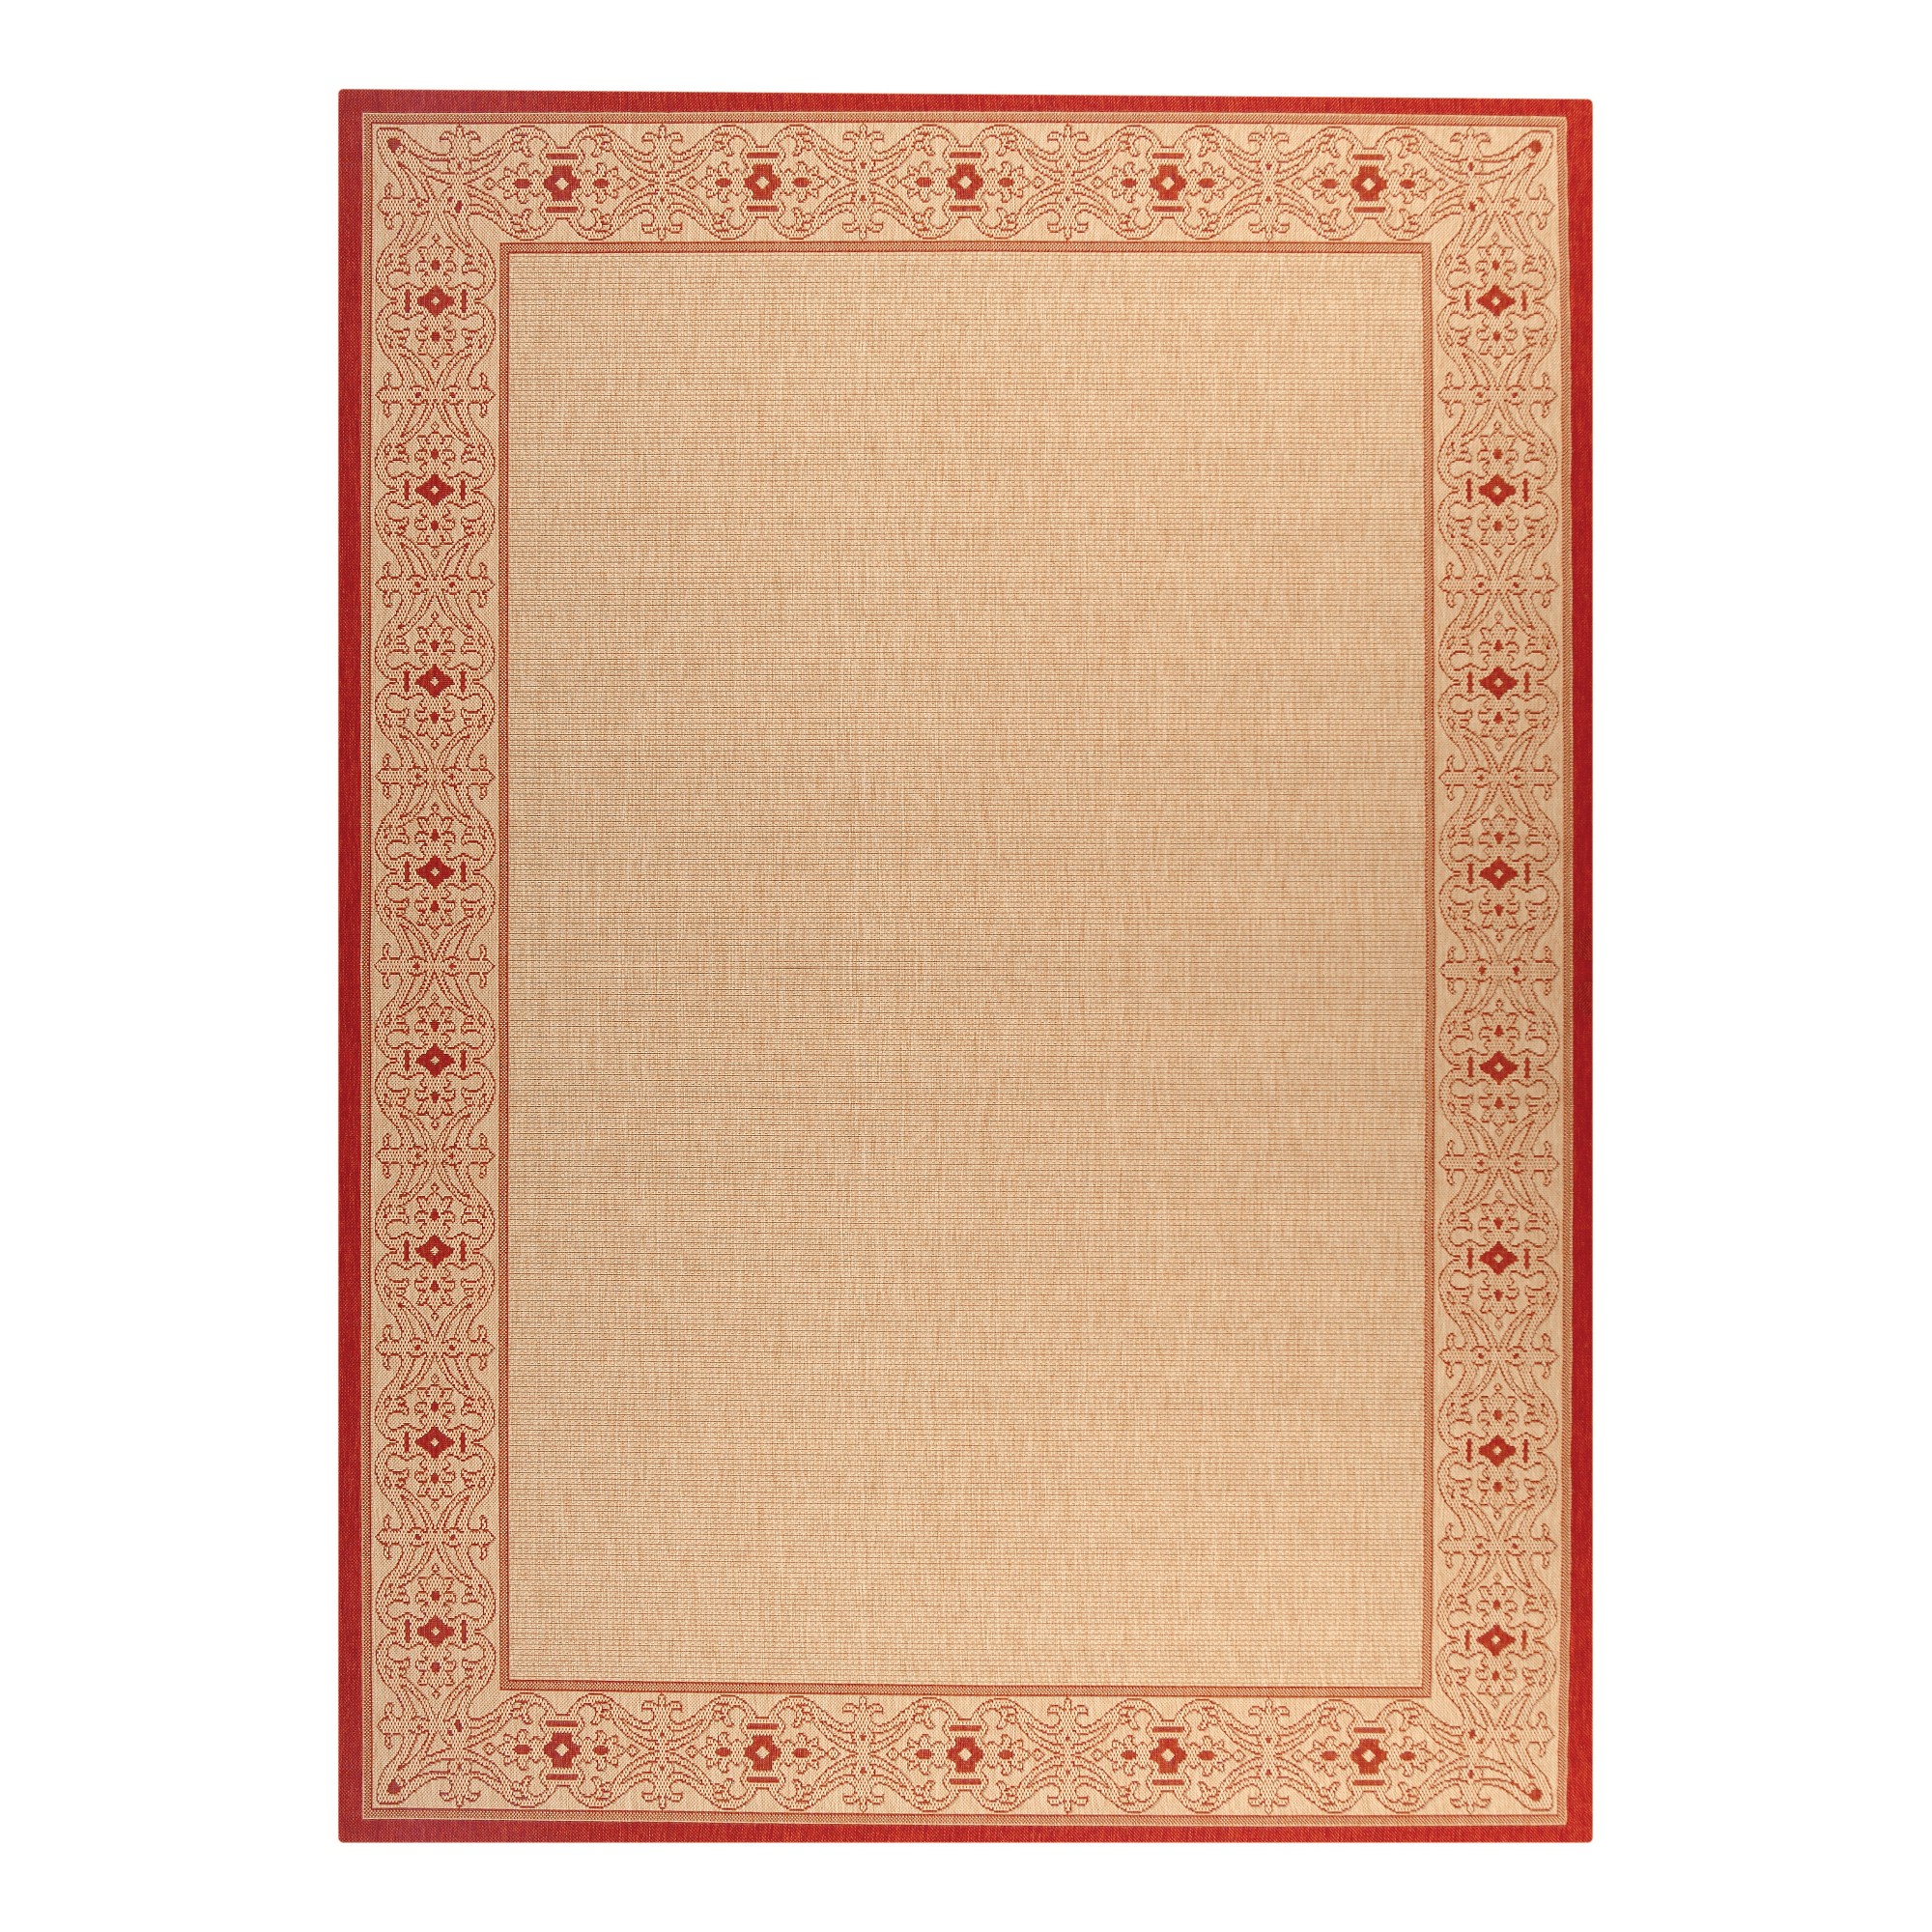 8'X11' Rectangle Antibes Border Patio Rug Natural/Red - Safavieh, Size: 8' X 11'